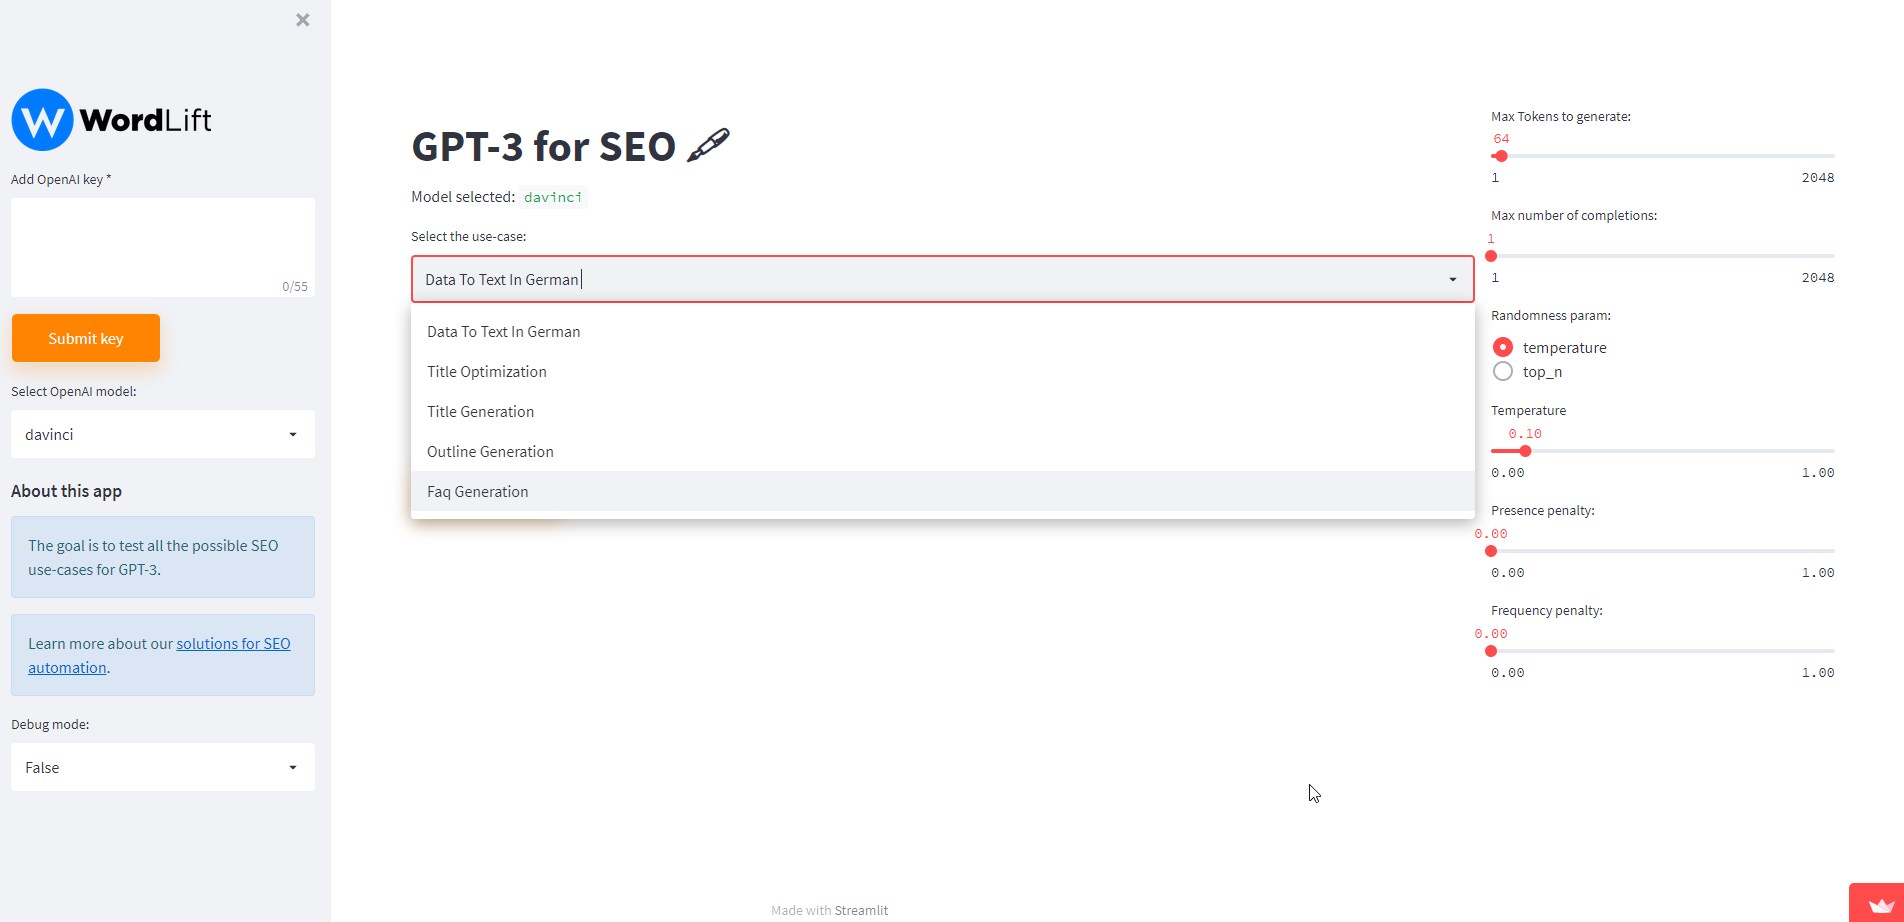 Simple Set of GPT-3 Tools for SEO